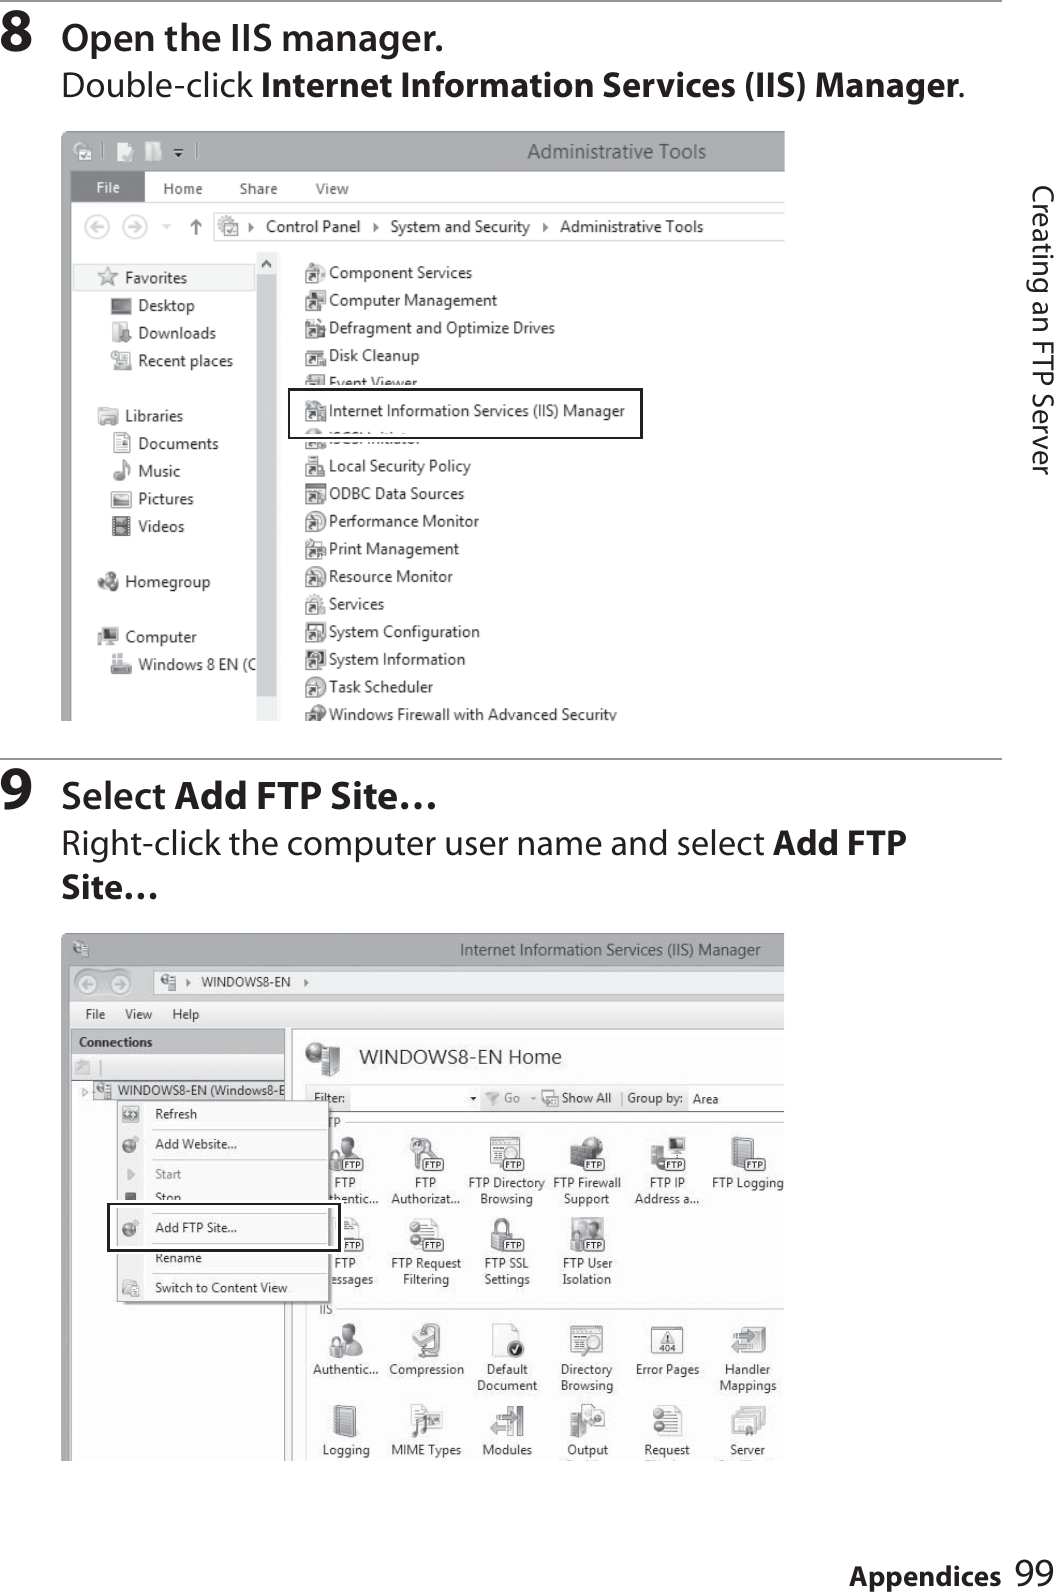 99AppendicesCreating an FTP Server8Open the IIS manager.Double-click Internet Information Services (IIS) Manager.9Select Add FTP Site…Right-click the computer user name and select Add FTP Site…